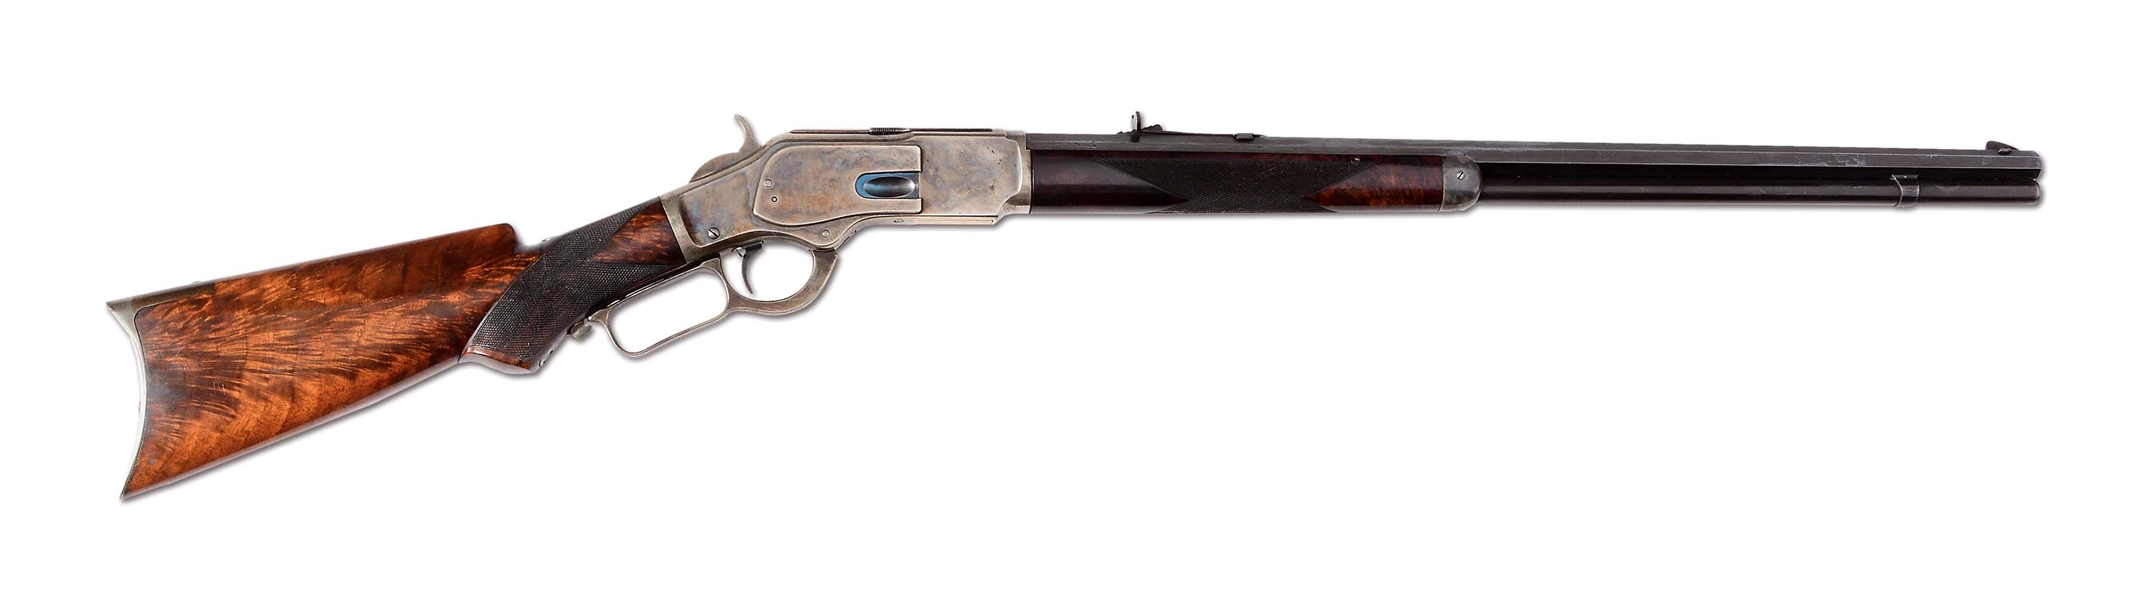 (A) WINCHESTER 3RD MODEL 1873 DELUXE LEVER ACTION RIFLE (1887)